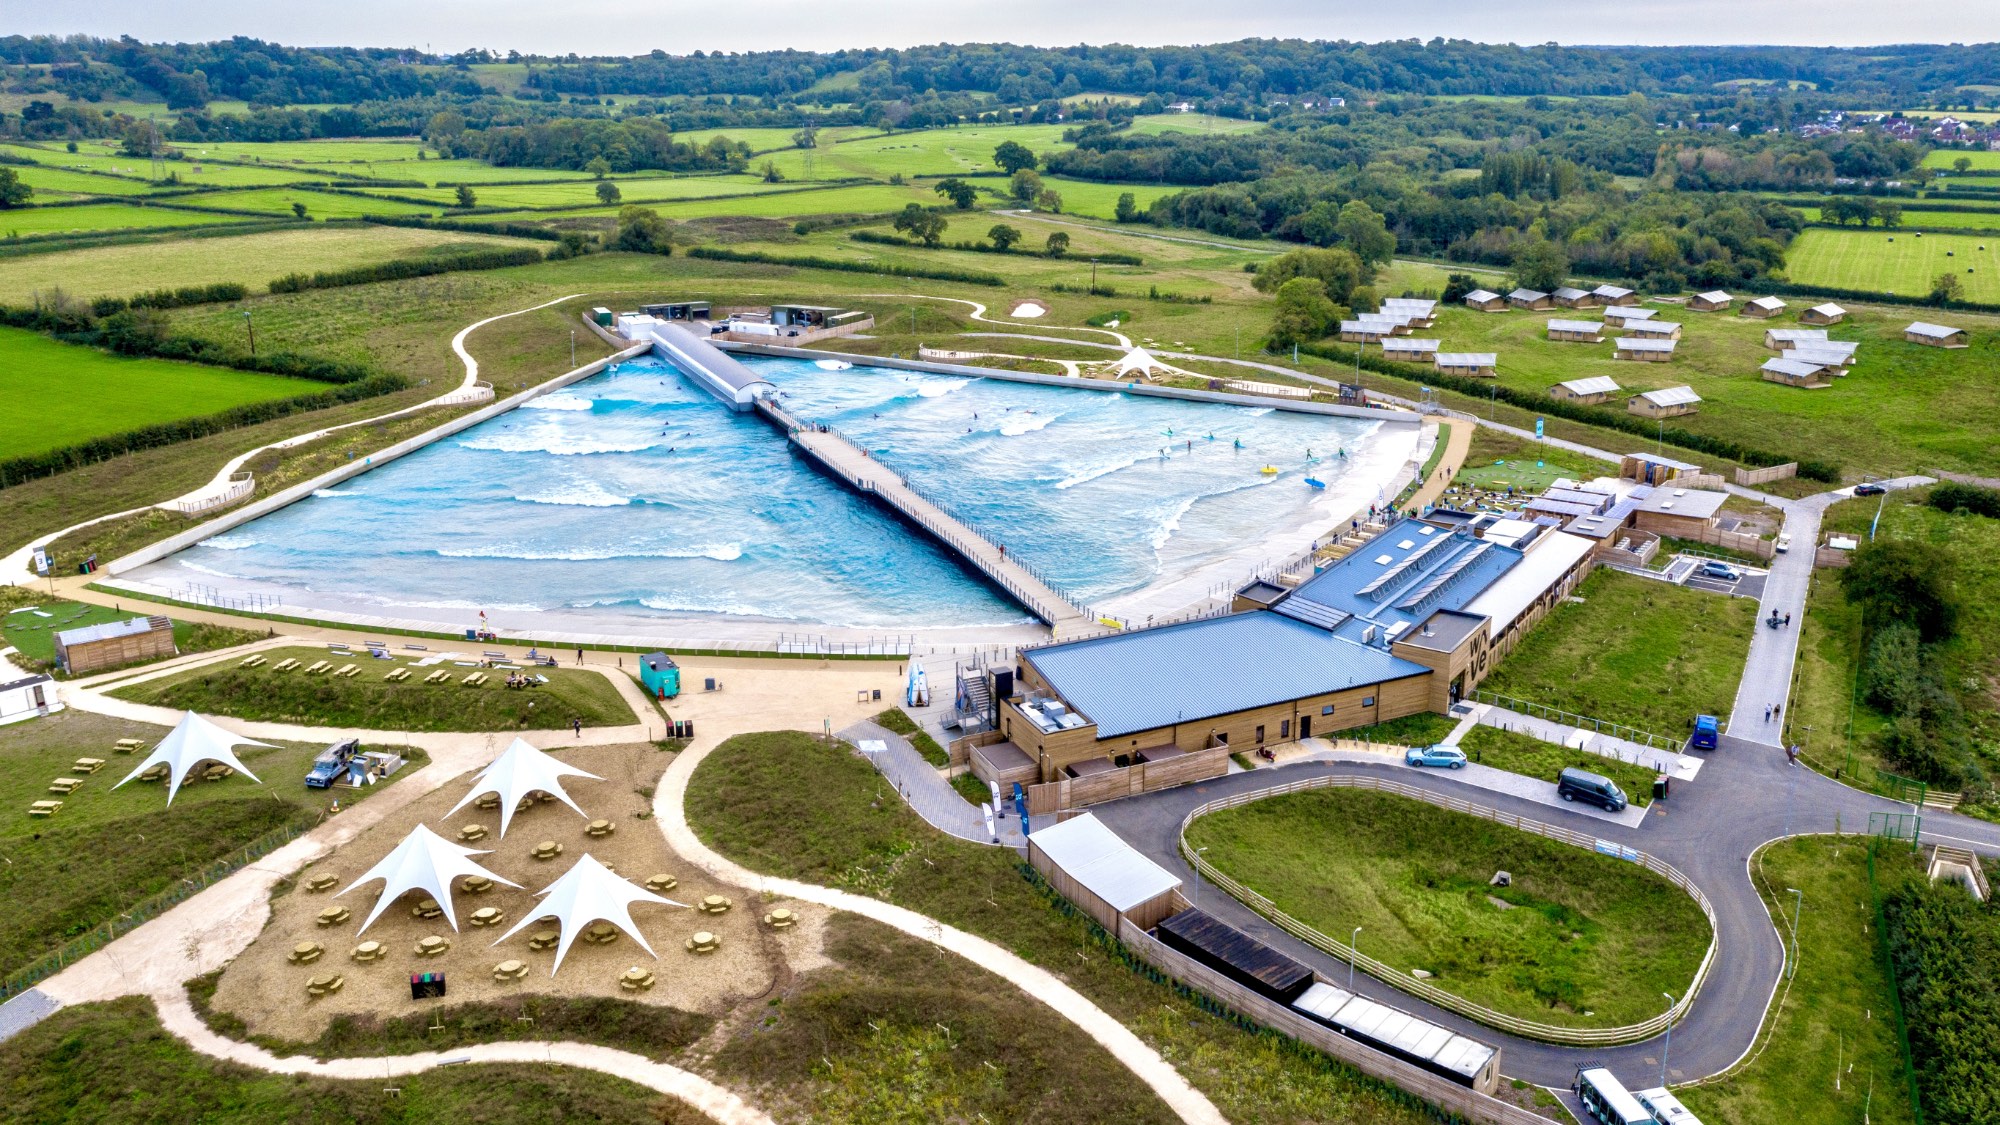 wave pool travel to the wave bristol: image shows a drone's view of the wave pool and surrounding land complete withe camping area